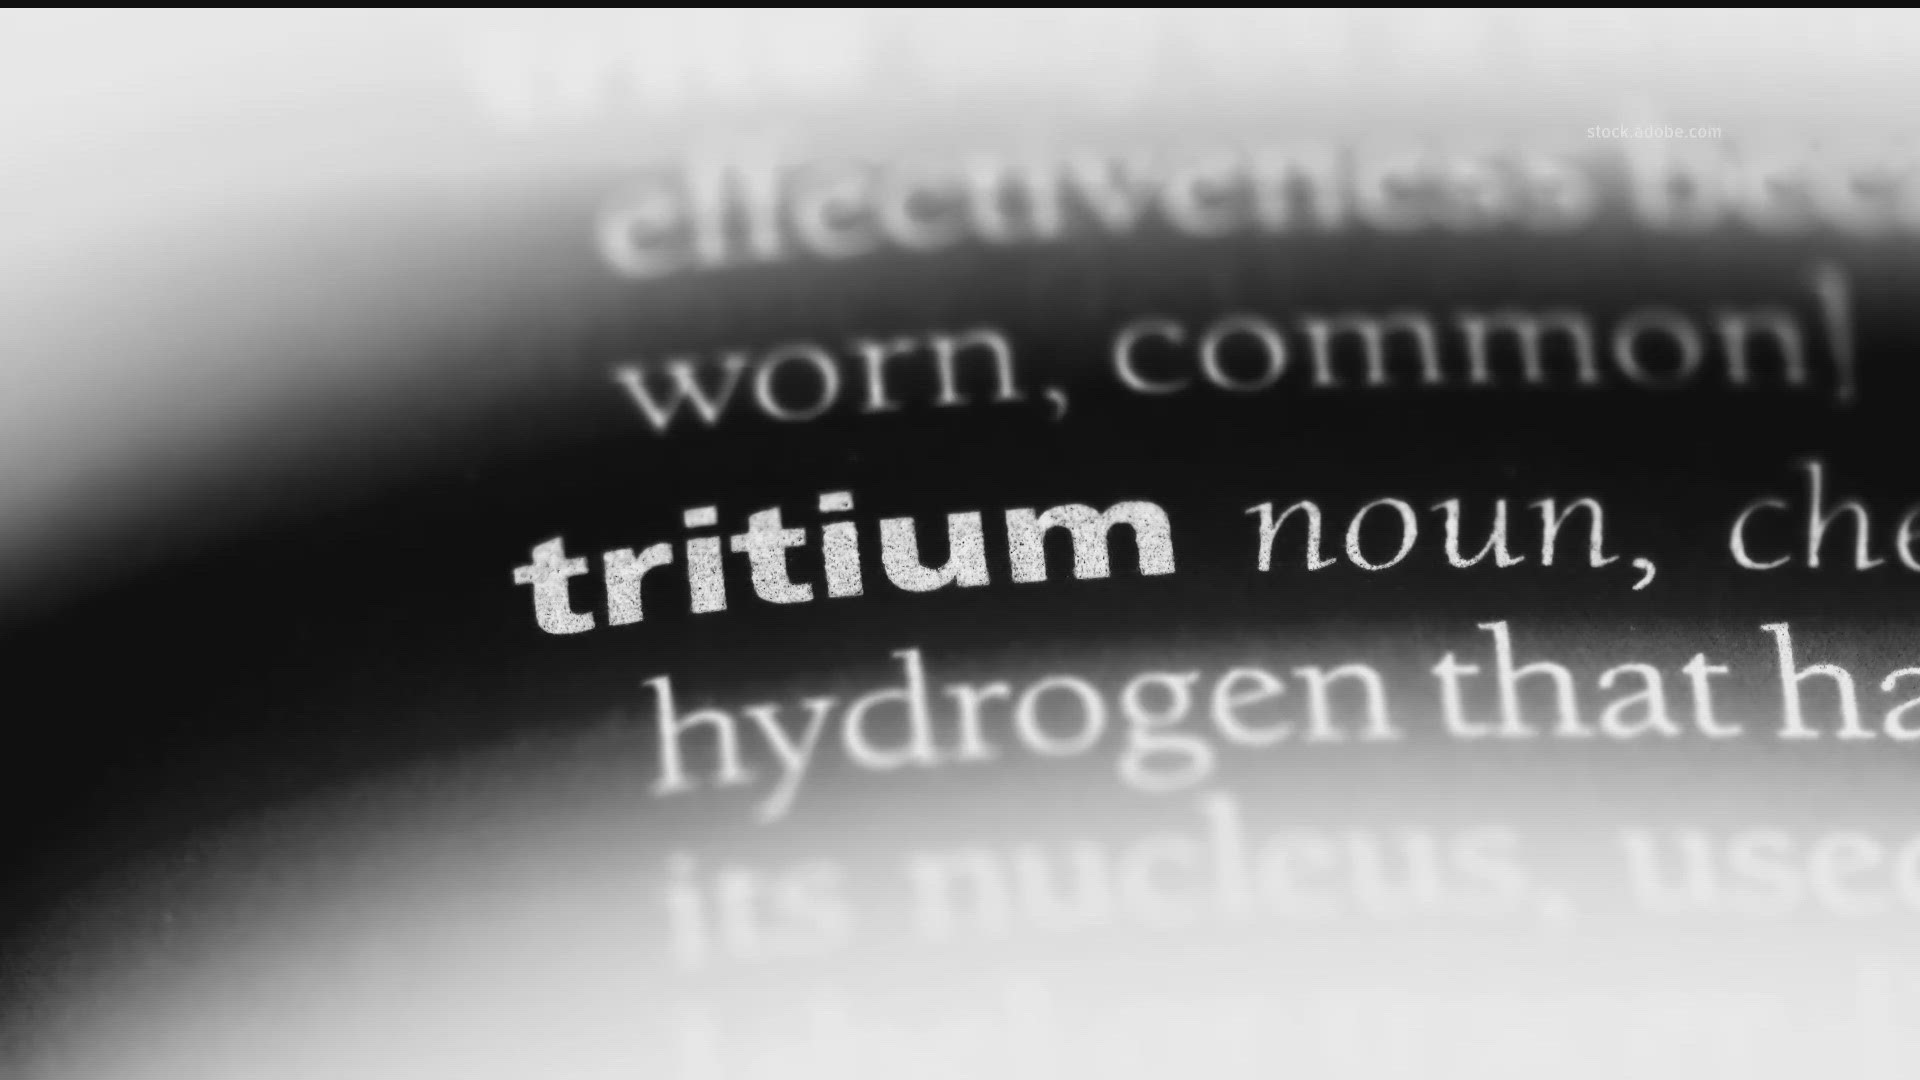 Nuclear science and engineering experts explain what tritium is following a leakage at an Xcel Energy plant.